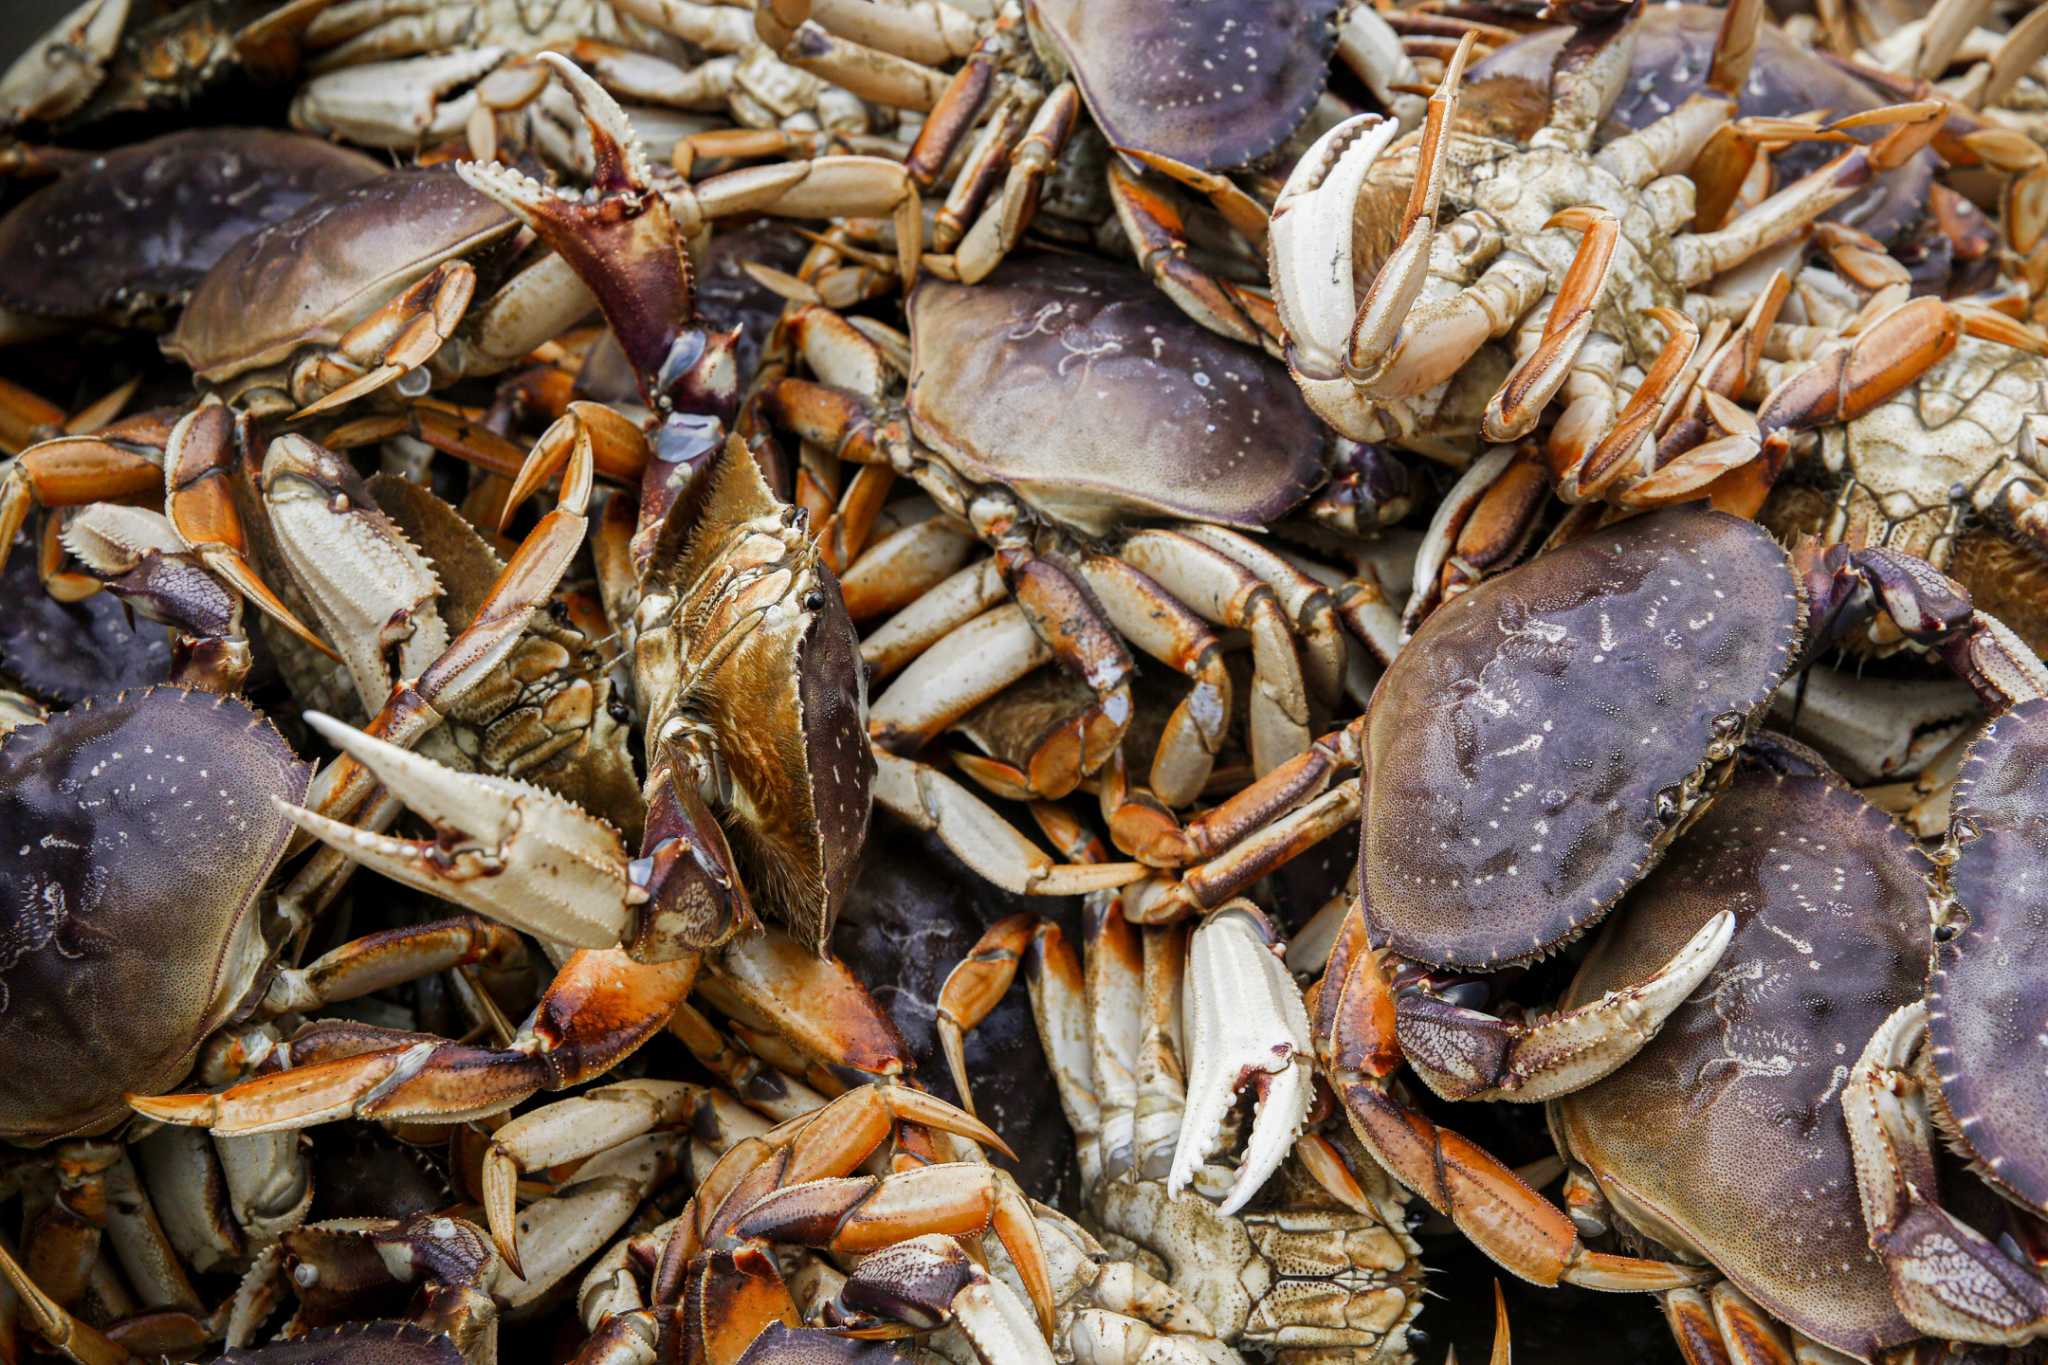 California Dungeness crab commercial fishing season ends in effort to